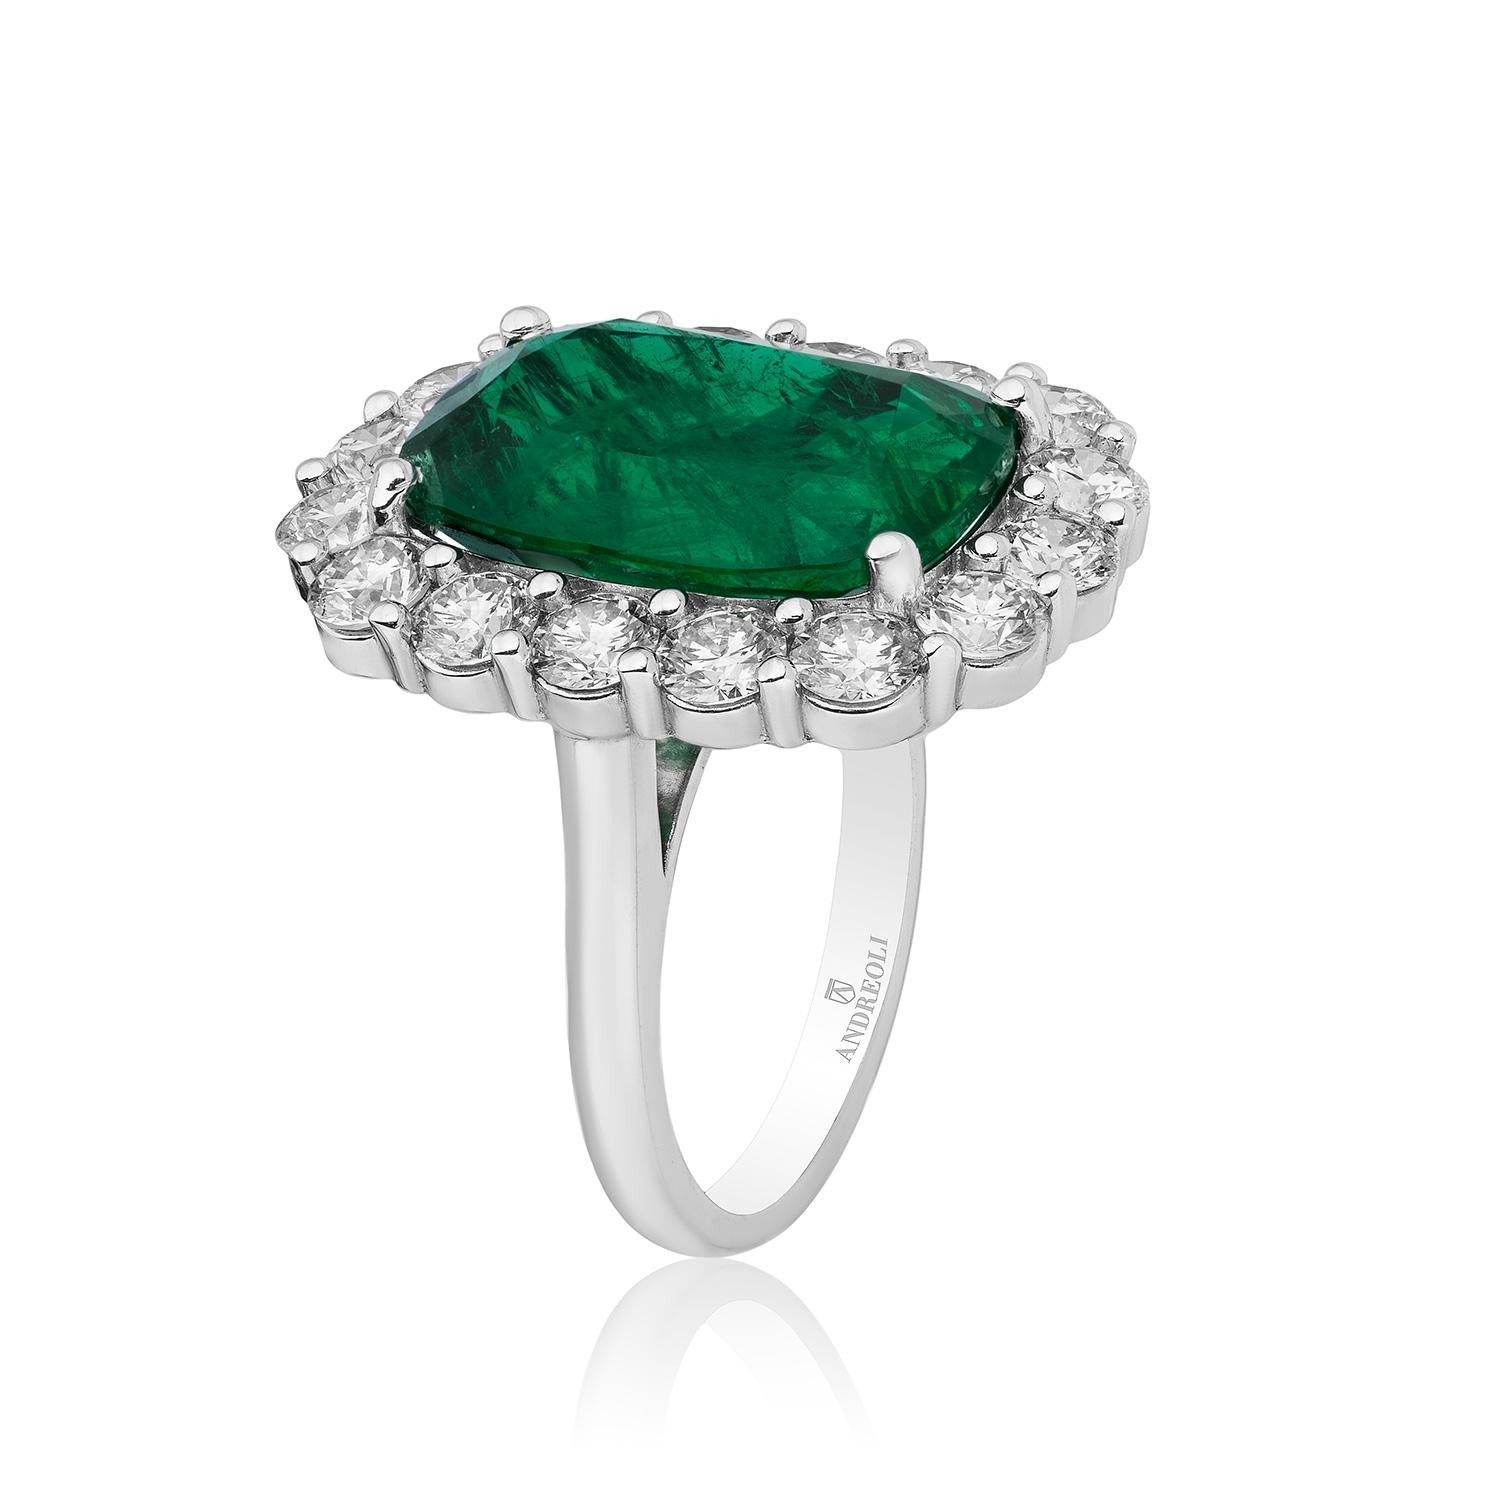 Andreoli 10.04 Carat Emerald CDC Certified Diamond Platinum Engagement Ring

This Andreoli ring Features:

2.98 Carat Round Brilliant Diamonds (F-G-H Color, VS-SI Clarity)
10.04 Carat Emerald CDC Switzerland based gemological laboratory Zambian